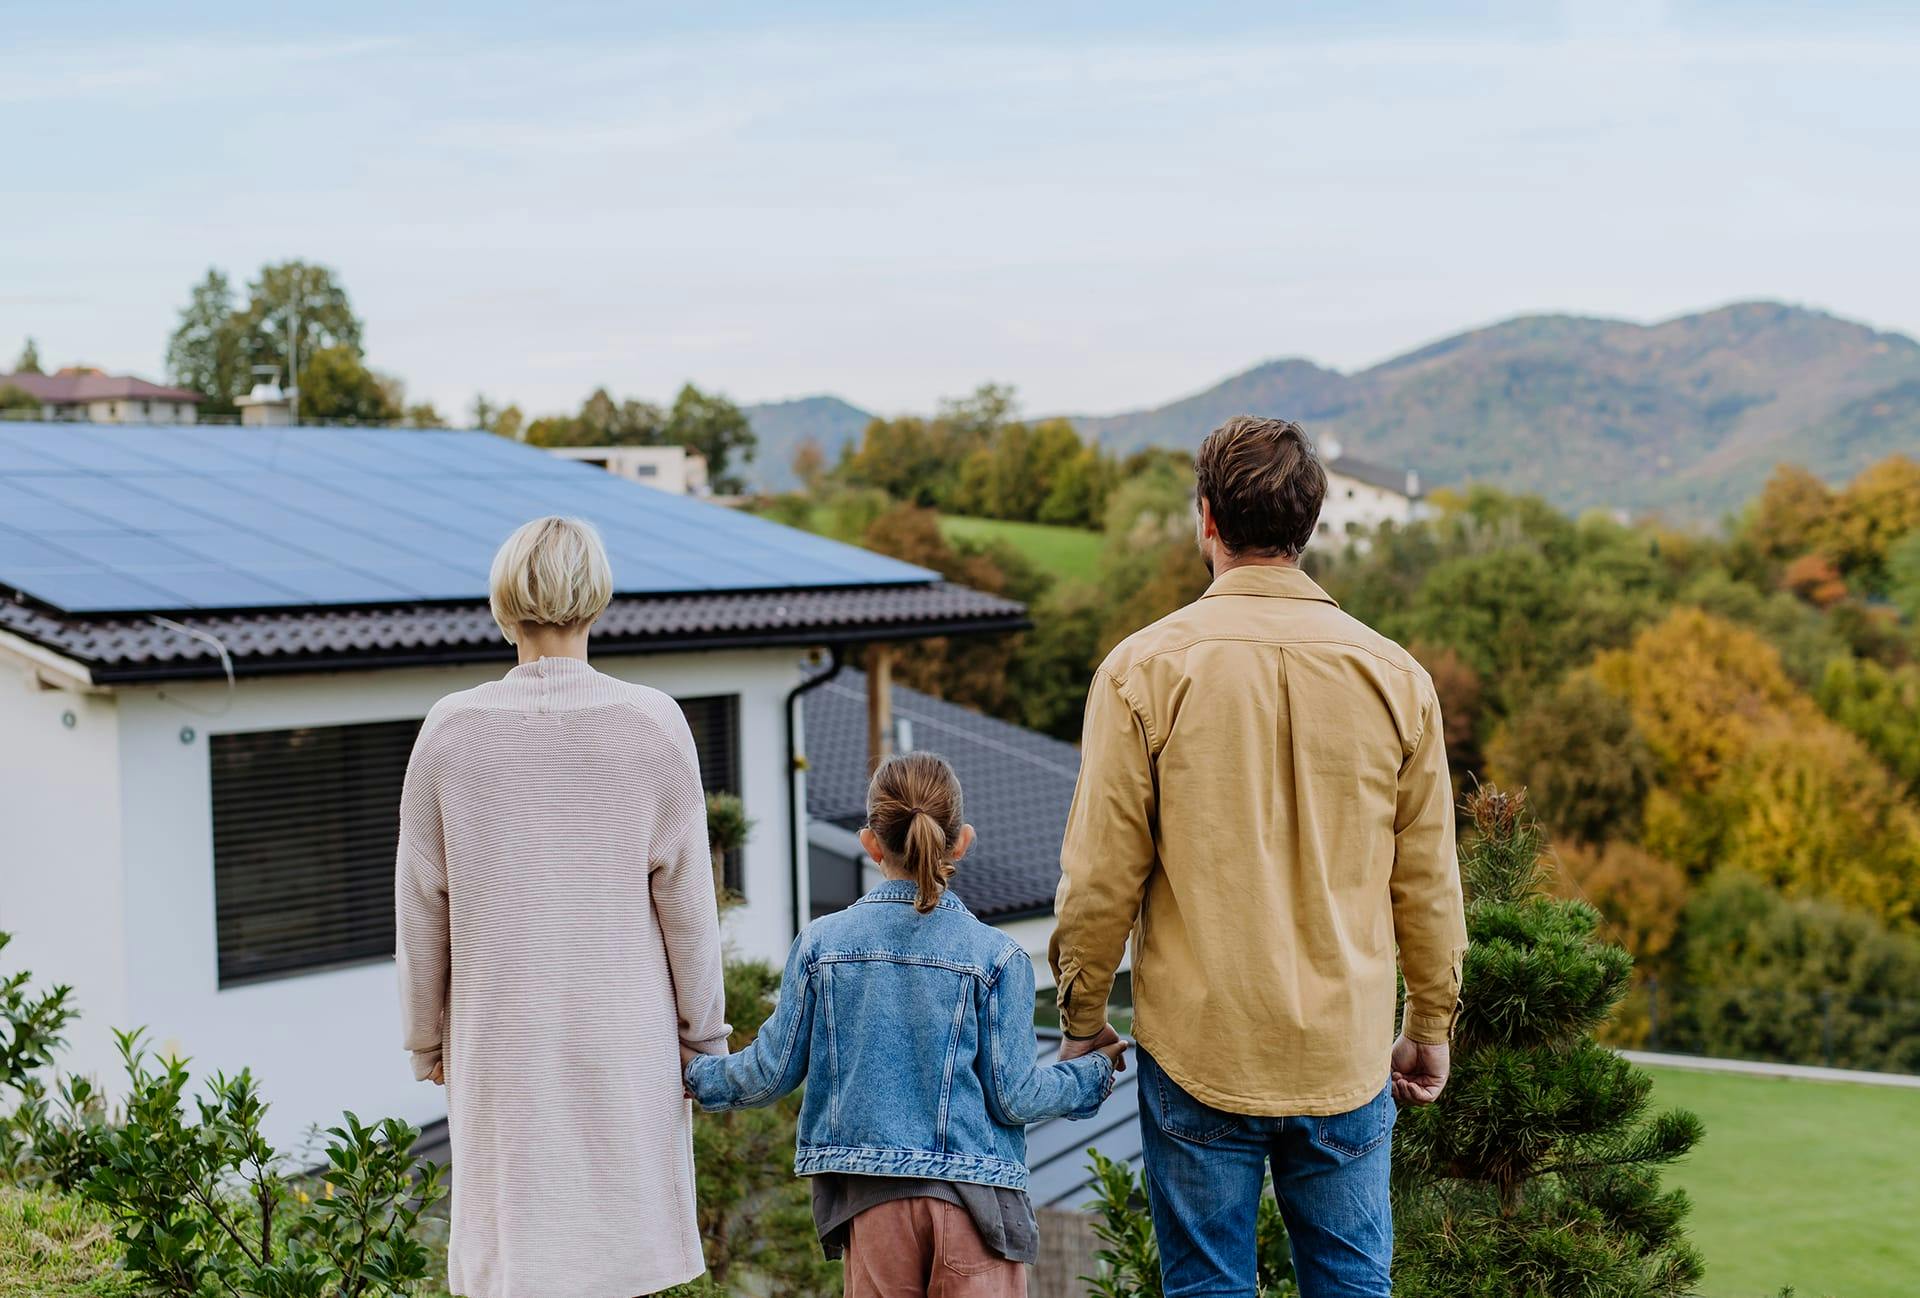 family walking up a hill towards a house with solar panels on the roof